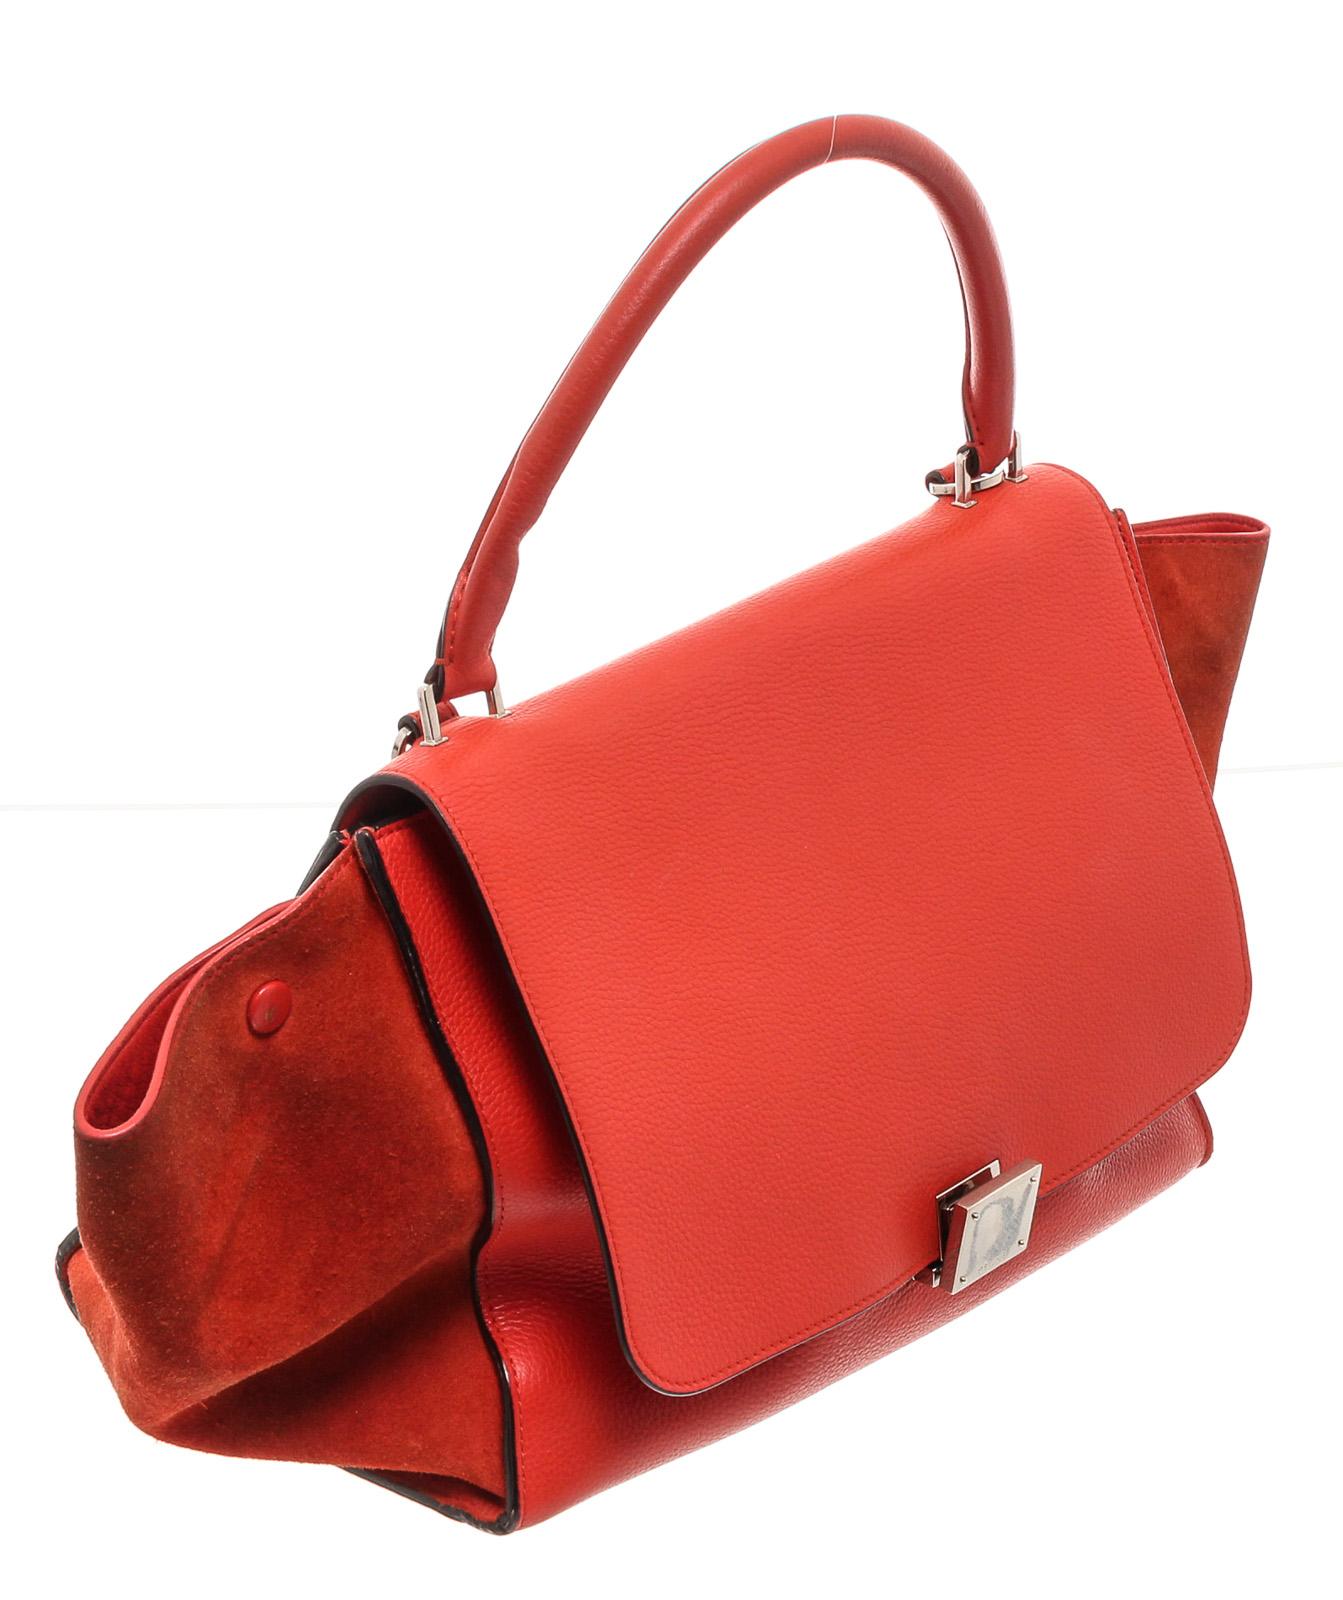 Red leather Céline Small Trapeze Bag with silver-tone hardware, single rolled top handle, detachable flat shoulder strap, dual side gussets with snap expansions at sides, exterior zip pocket at back, tonal leather lining, dual interior slit pockets